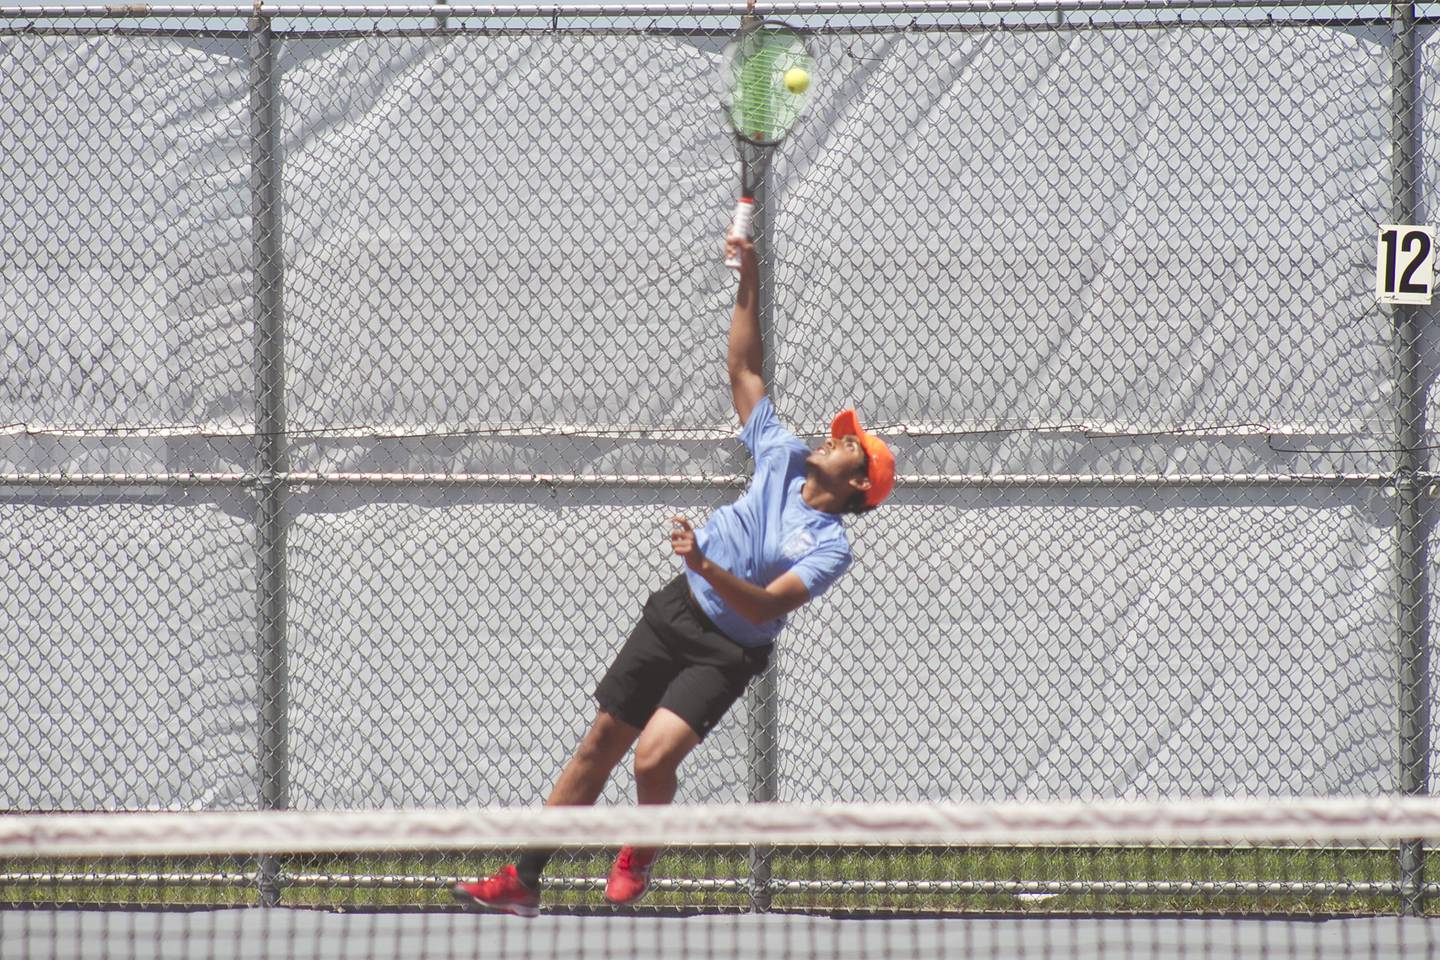 Oswego East junior Vivek Parashar sends the ball flying across the court during boys' conference tennis May 26 at Plainfield North High School.